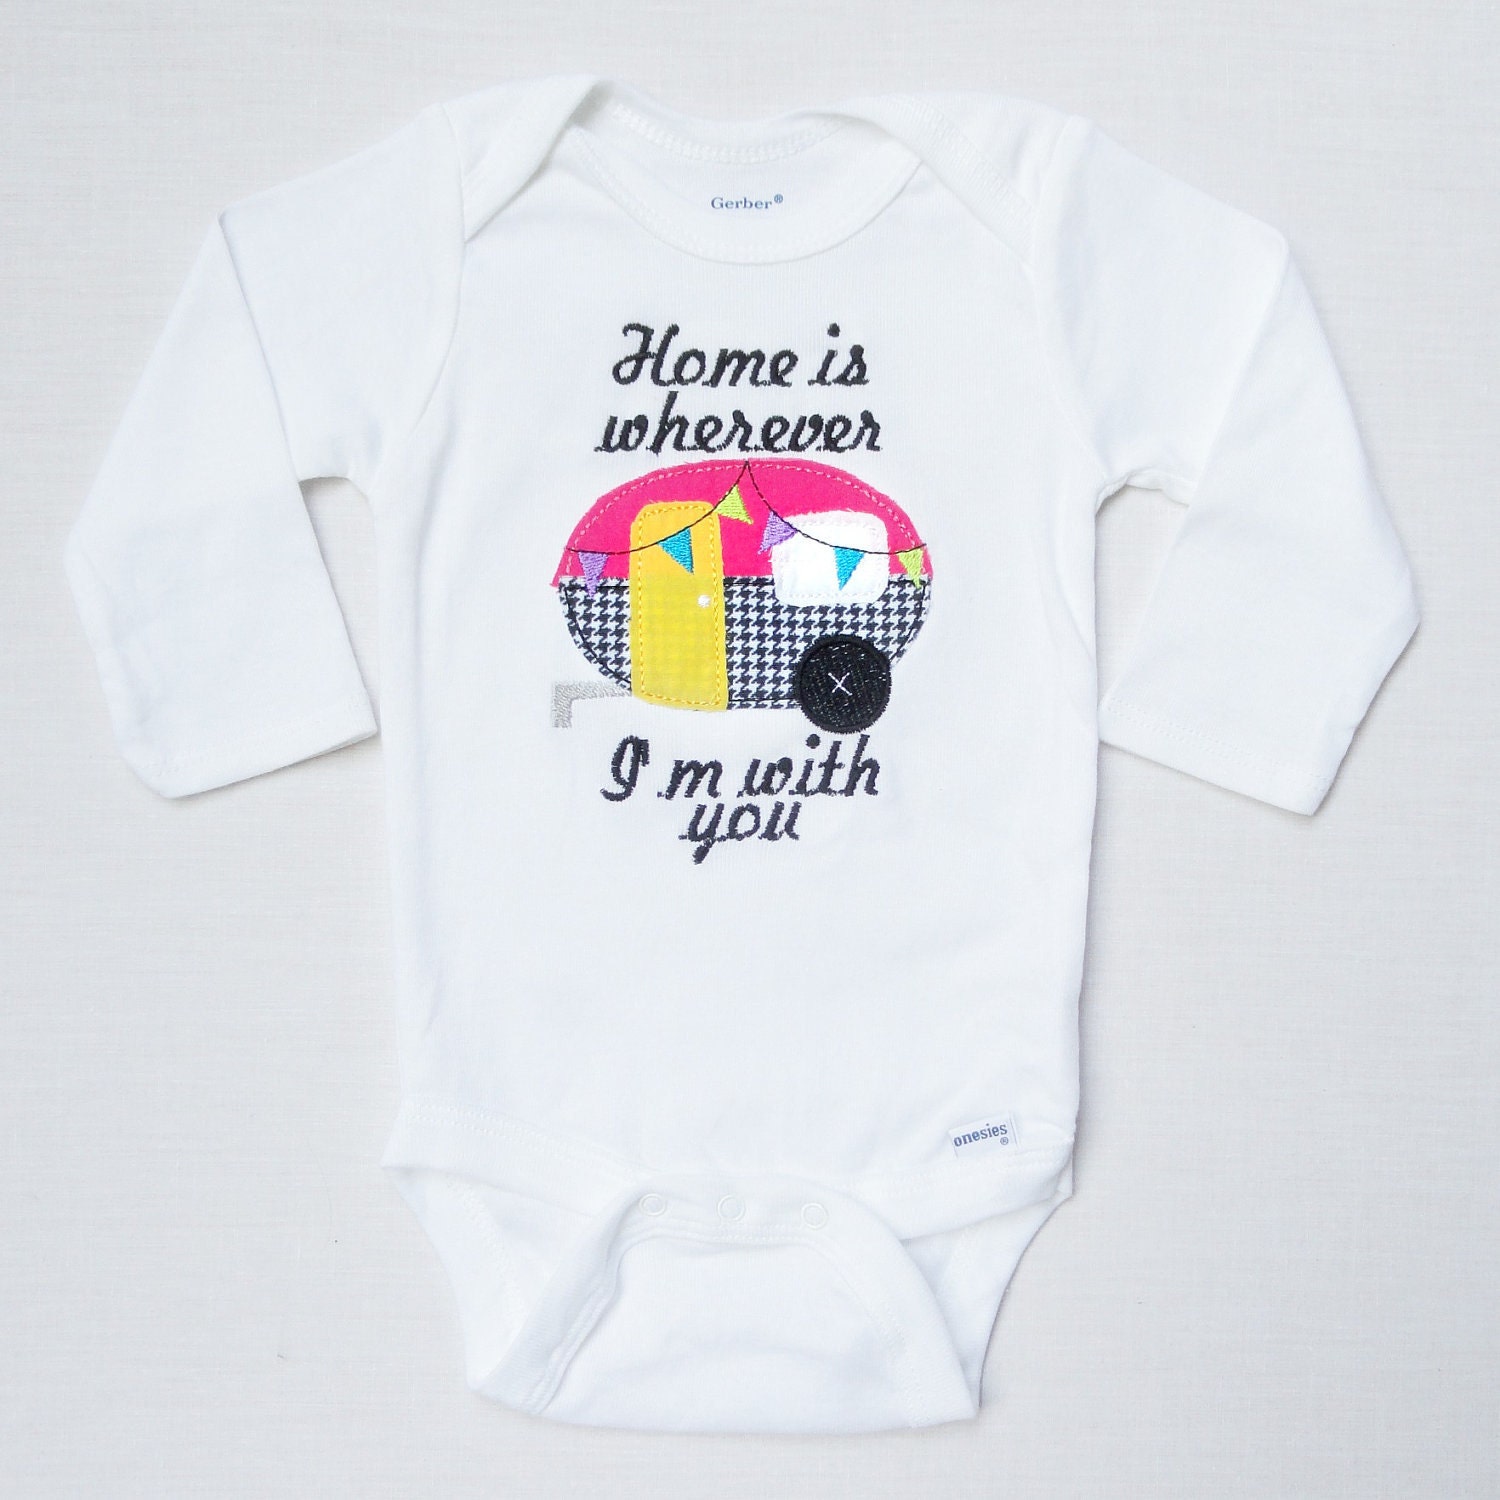 Home Is Wherever I'm With You baby onesie or childrens tee